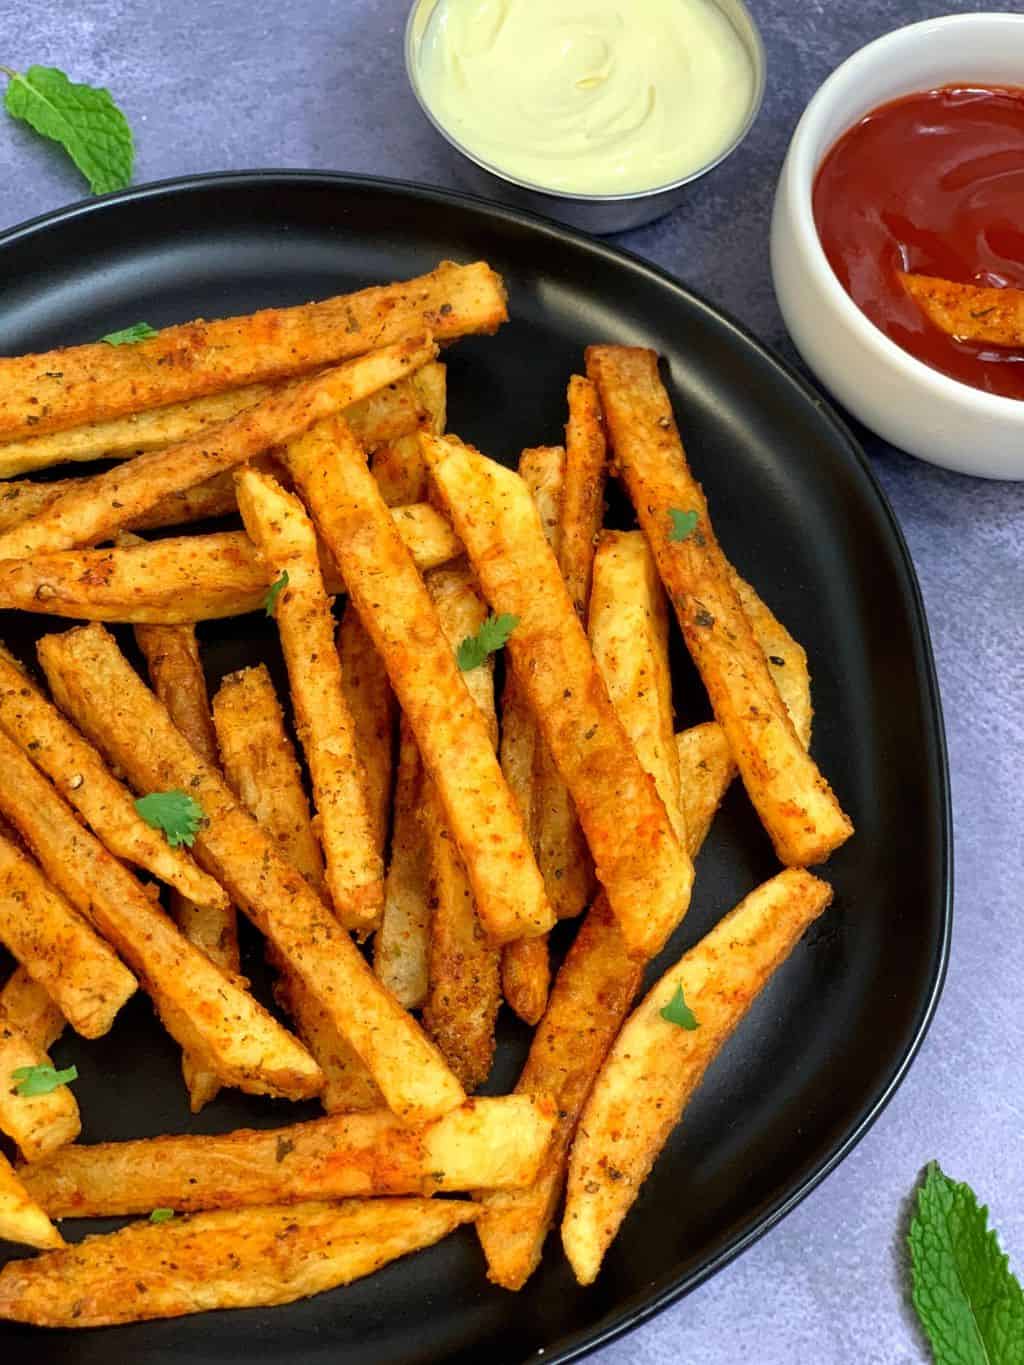 masala french fries served on a plate along with ketchup and mayonnaise